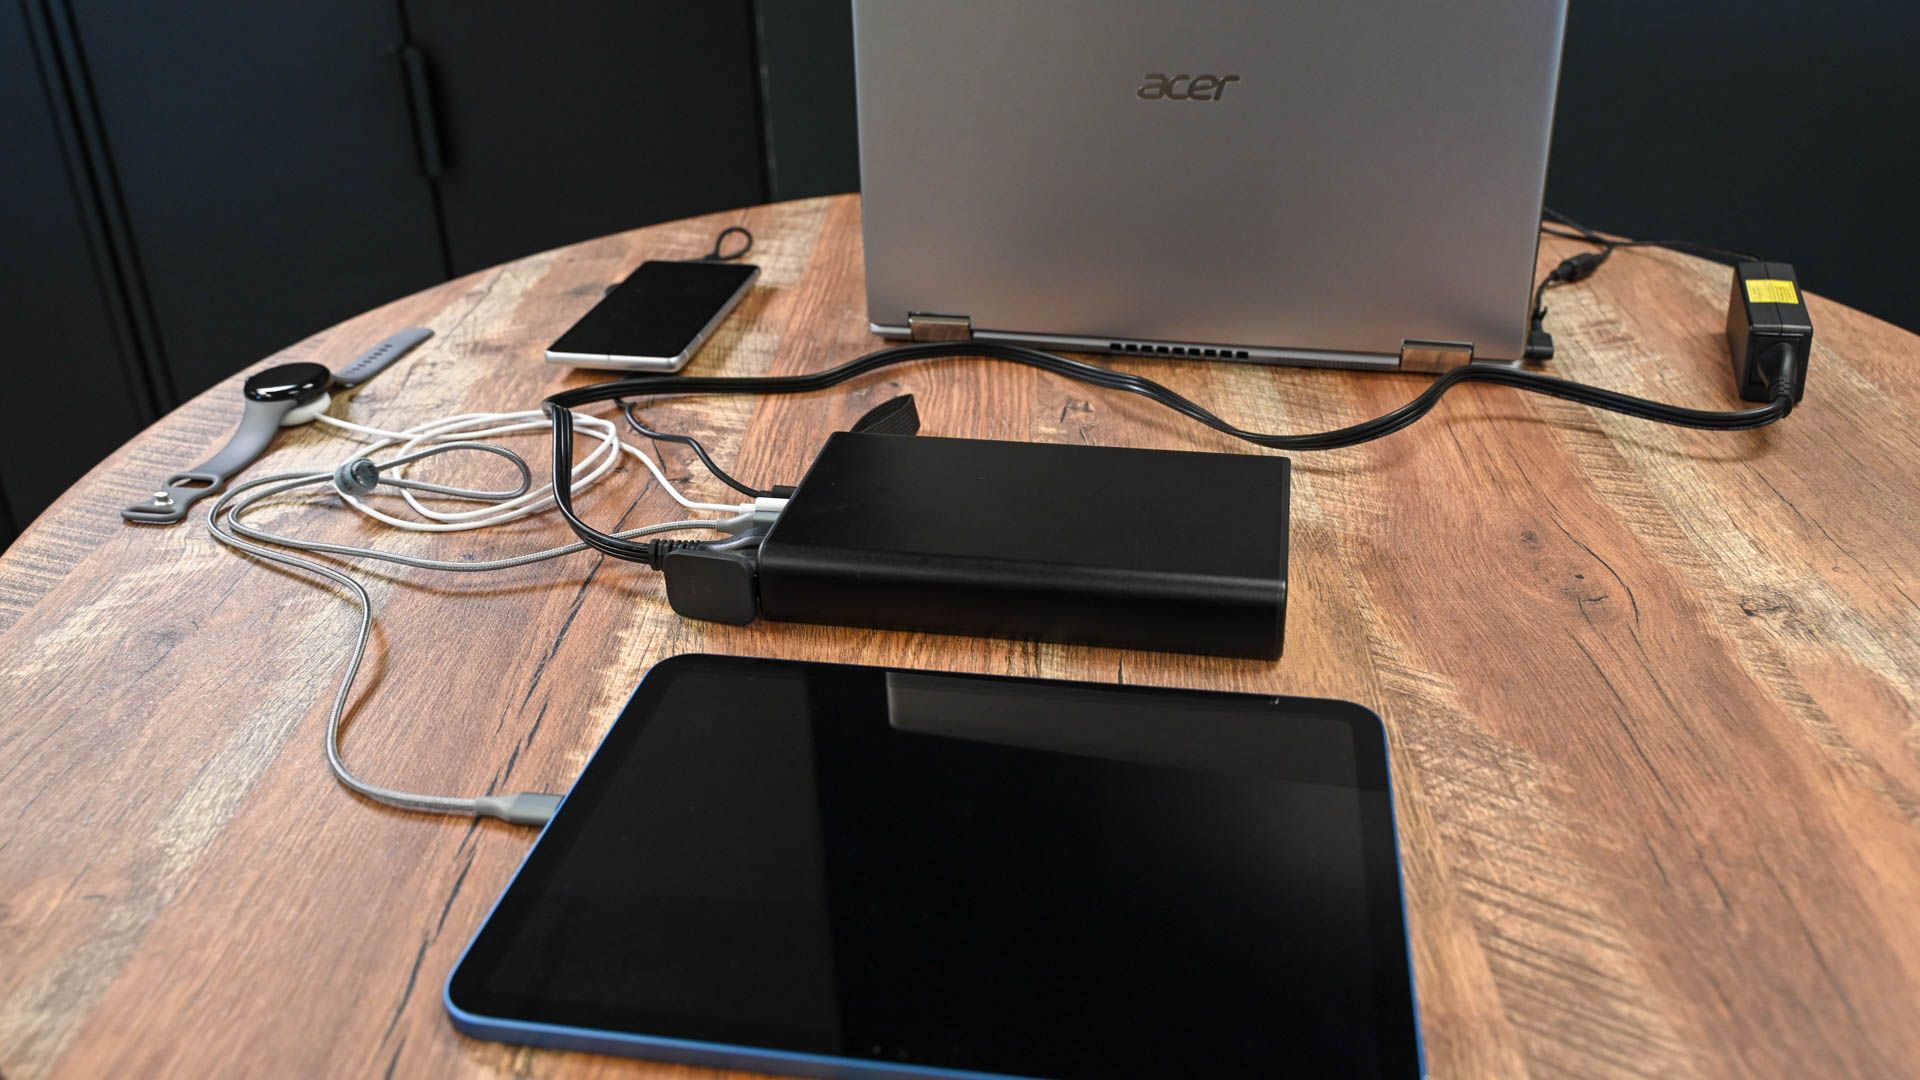 The mophie powerstation Pro AC connected to several devices.